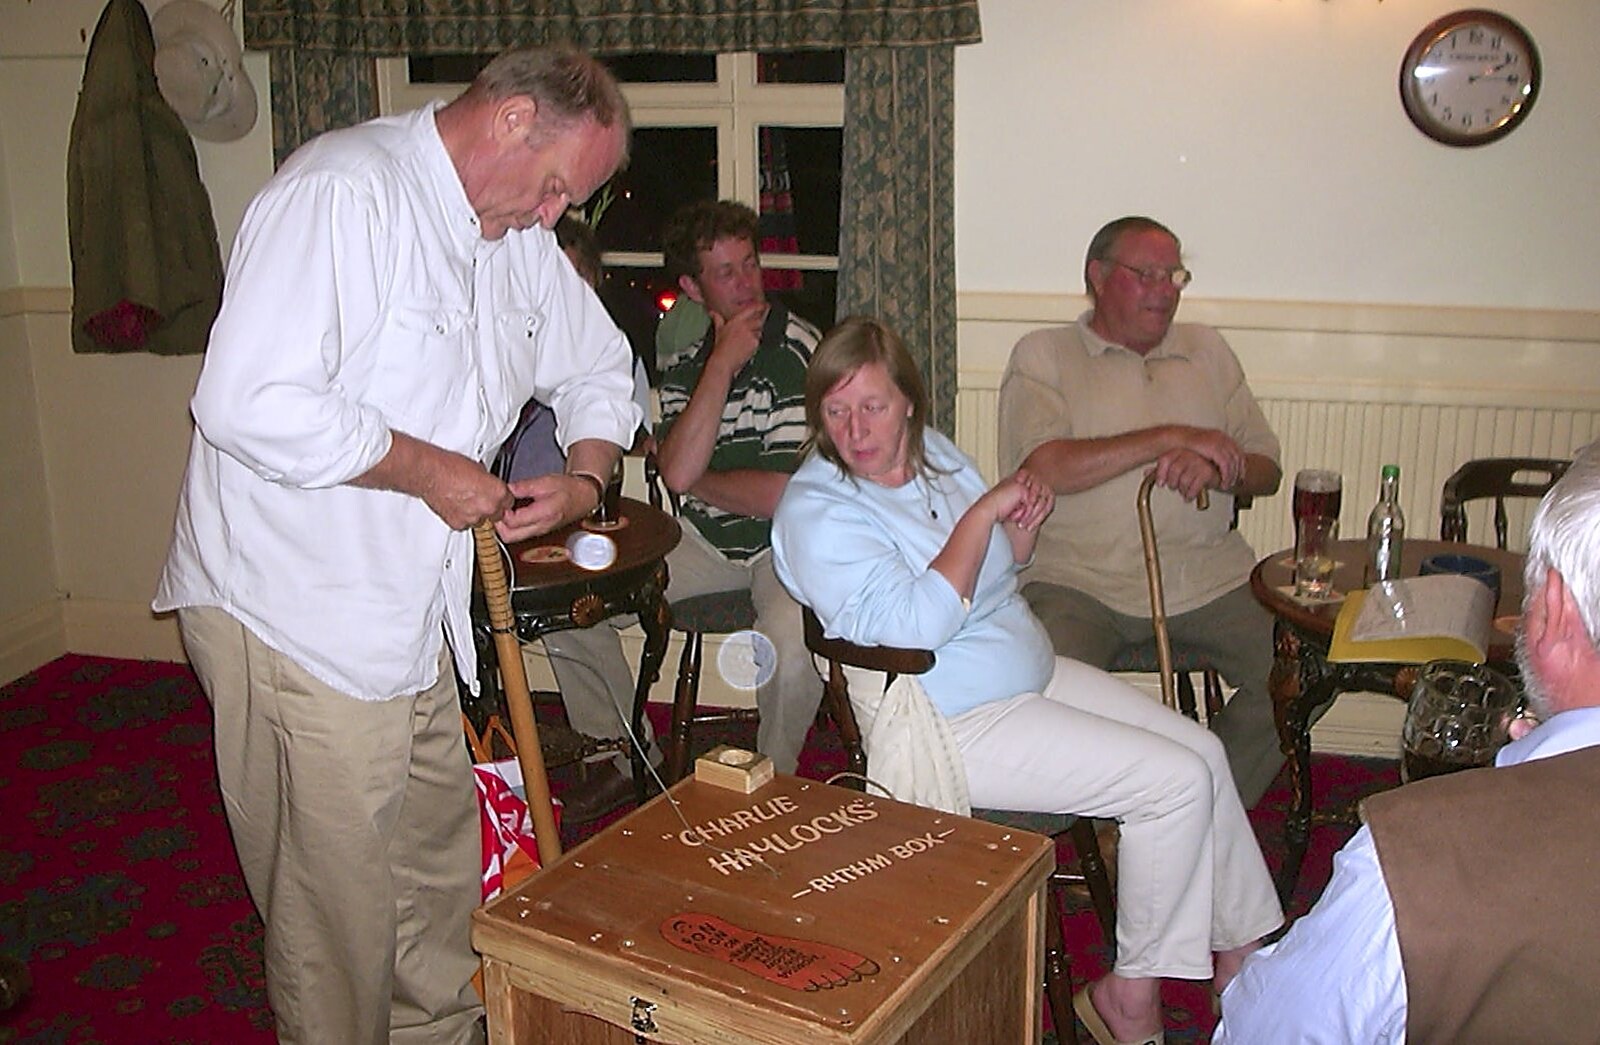 The BBs do a Wedding Gig and the BSCC go Sheep Rustling, Gislingham and Redgrave, Suffolk - 10th July 2004: Charlie Haylock strings up the rhythm box